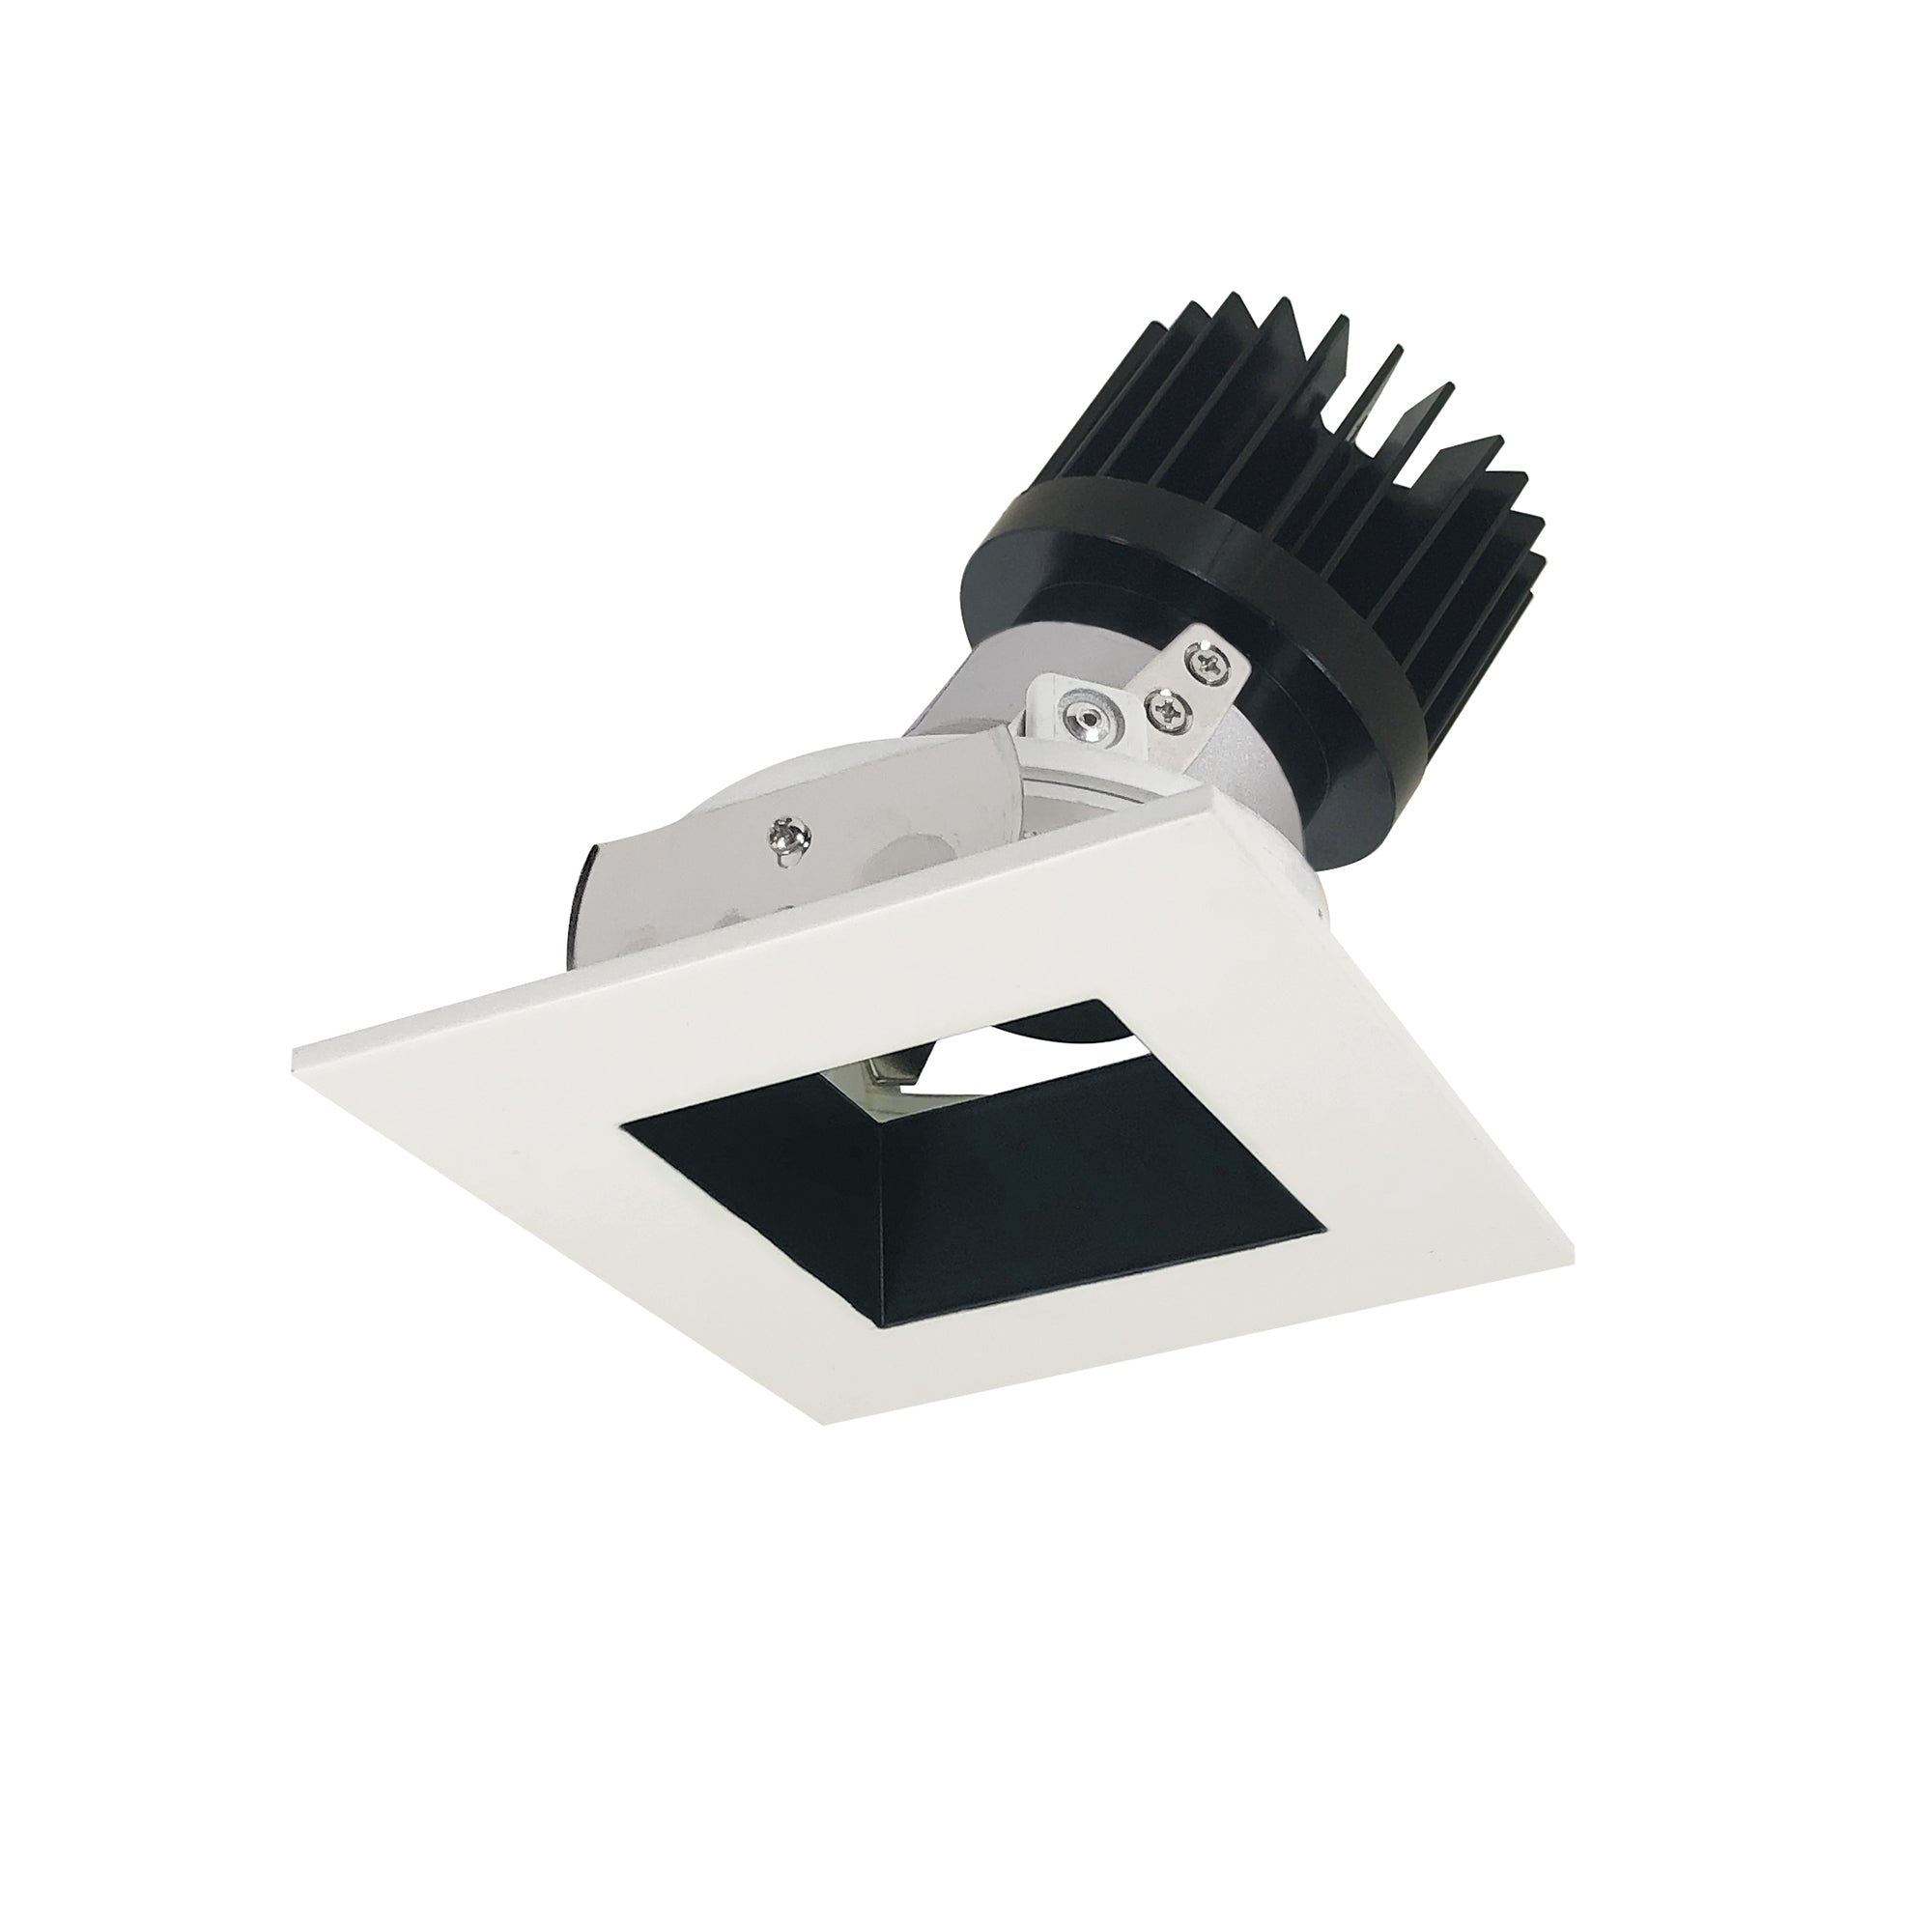 Nora Lighting NIO-4SDSQ27XBW/HL 4" Iolite LED Square Adjustable Reflector With Square Aperture, 1500lm/2000lm (varies by housing), 2700K - Black Reflector / White Flange